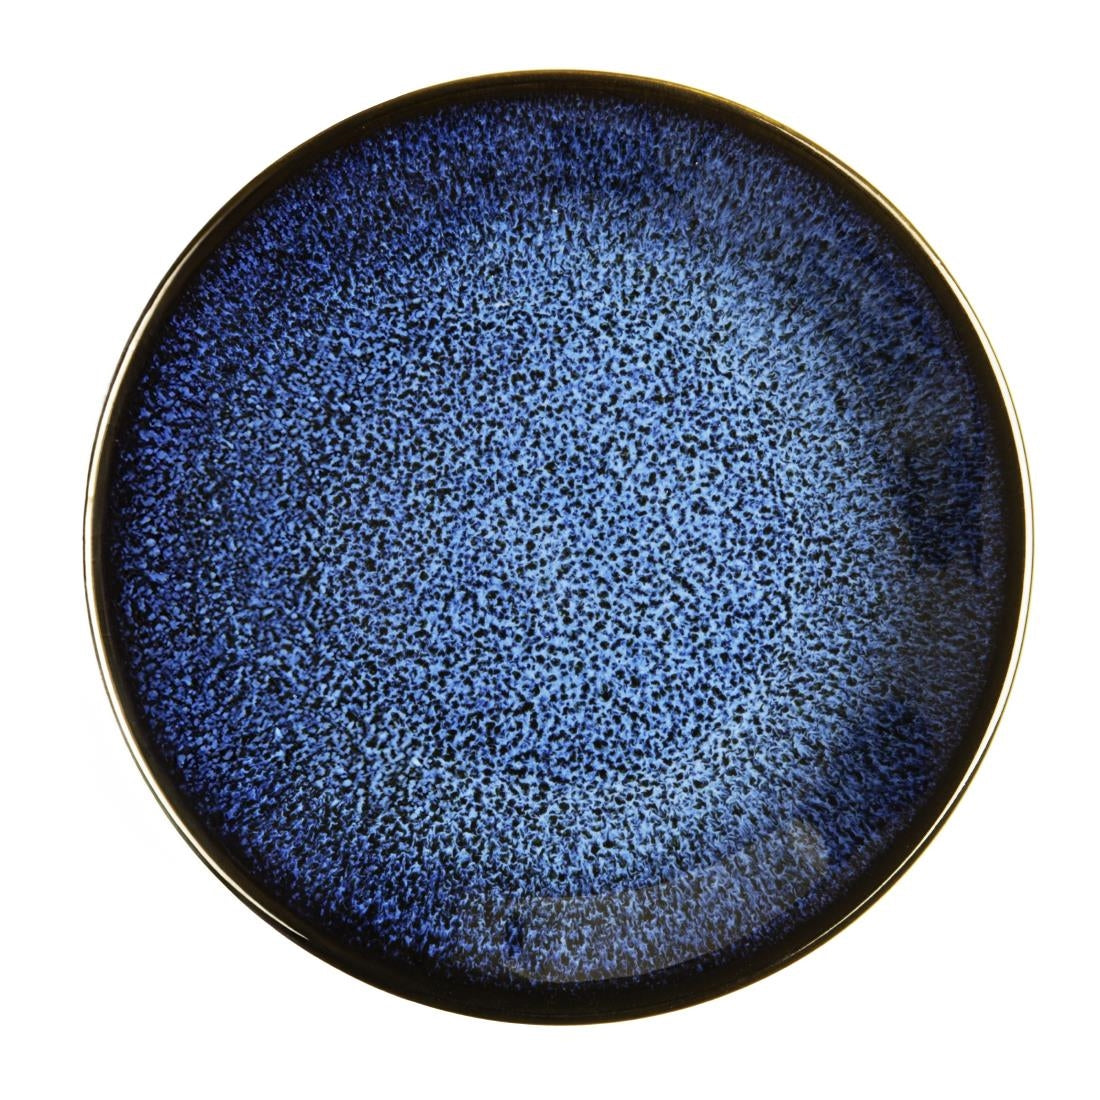 DZ777 Olympia Luna Midnight Blue Dipping Dishes 100mm (Pack of 12)